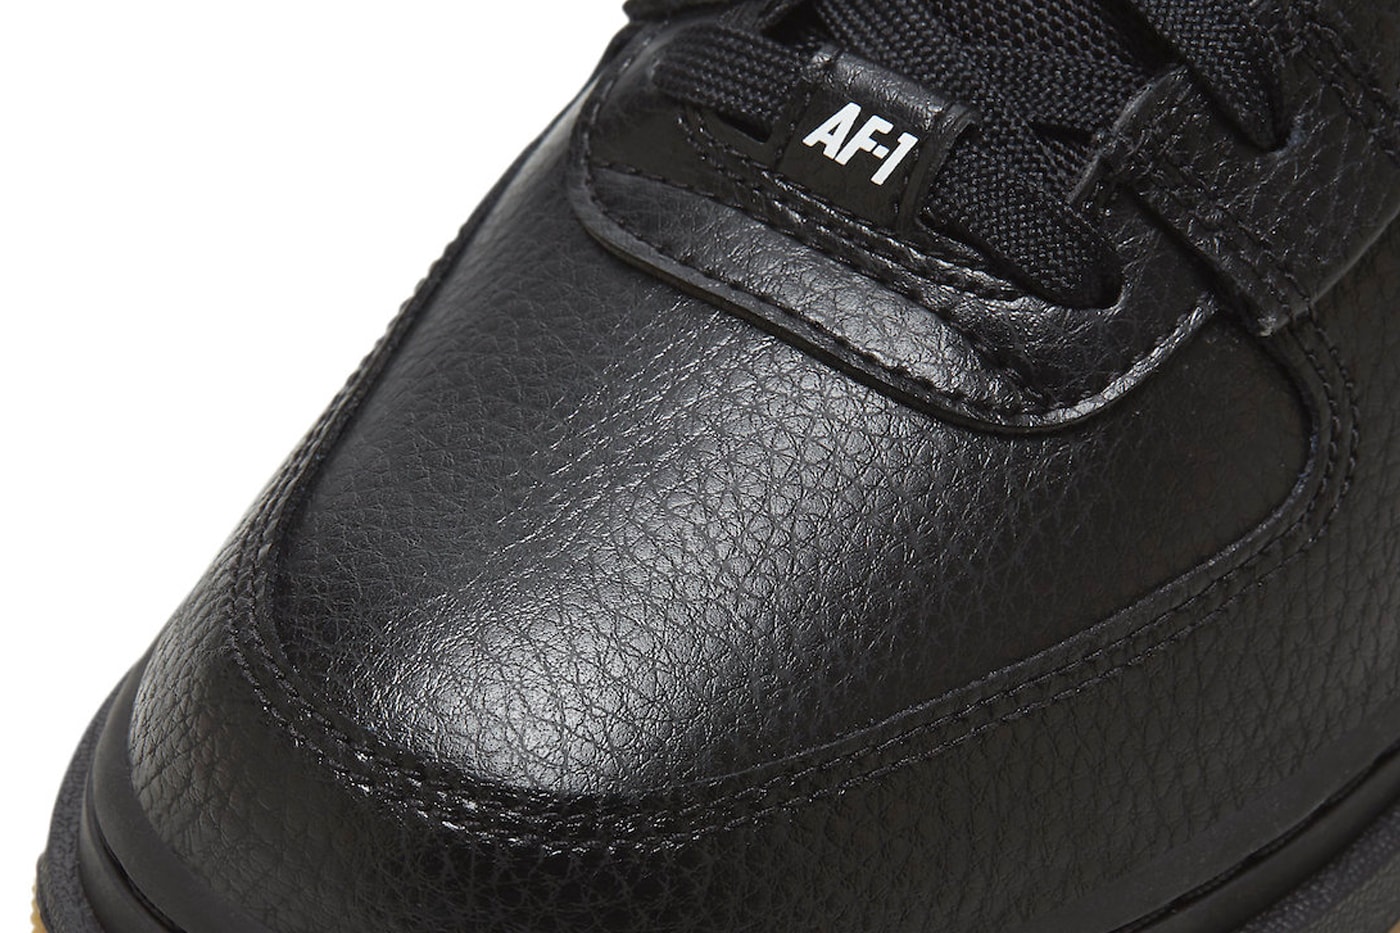 Nike Air Force 1 Low Utility Black/Gum Release